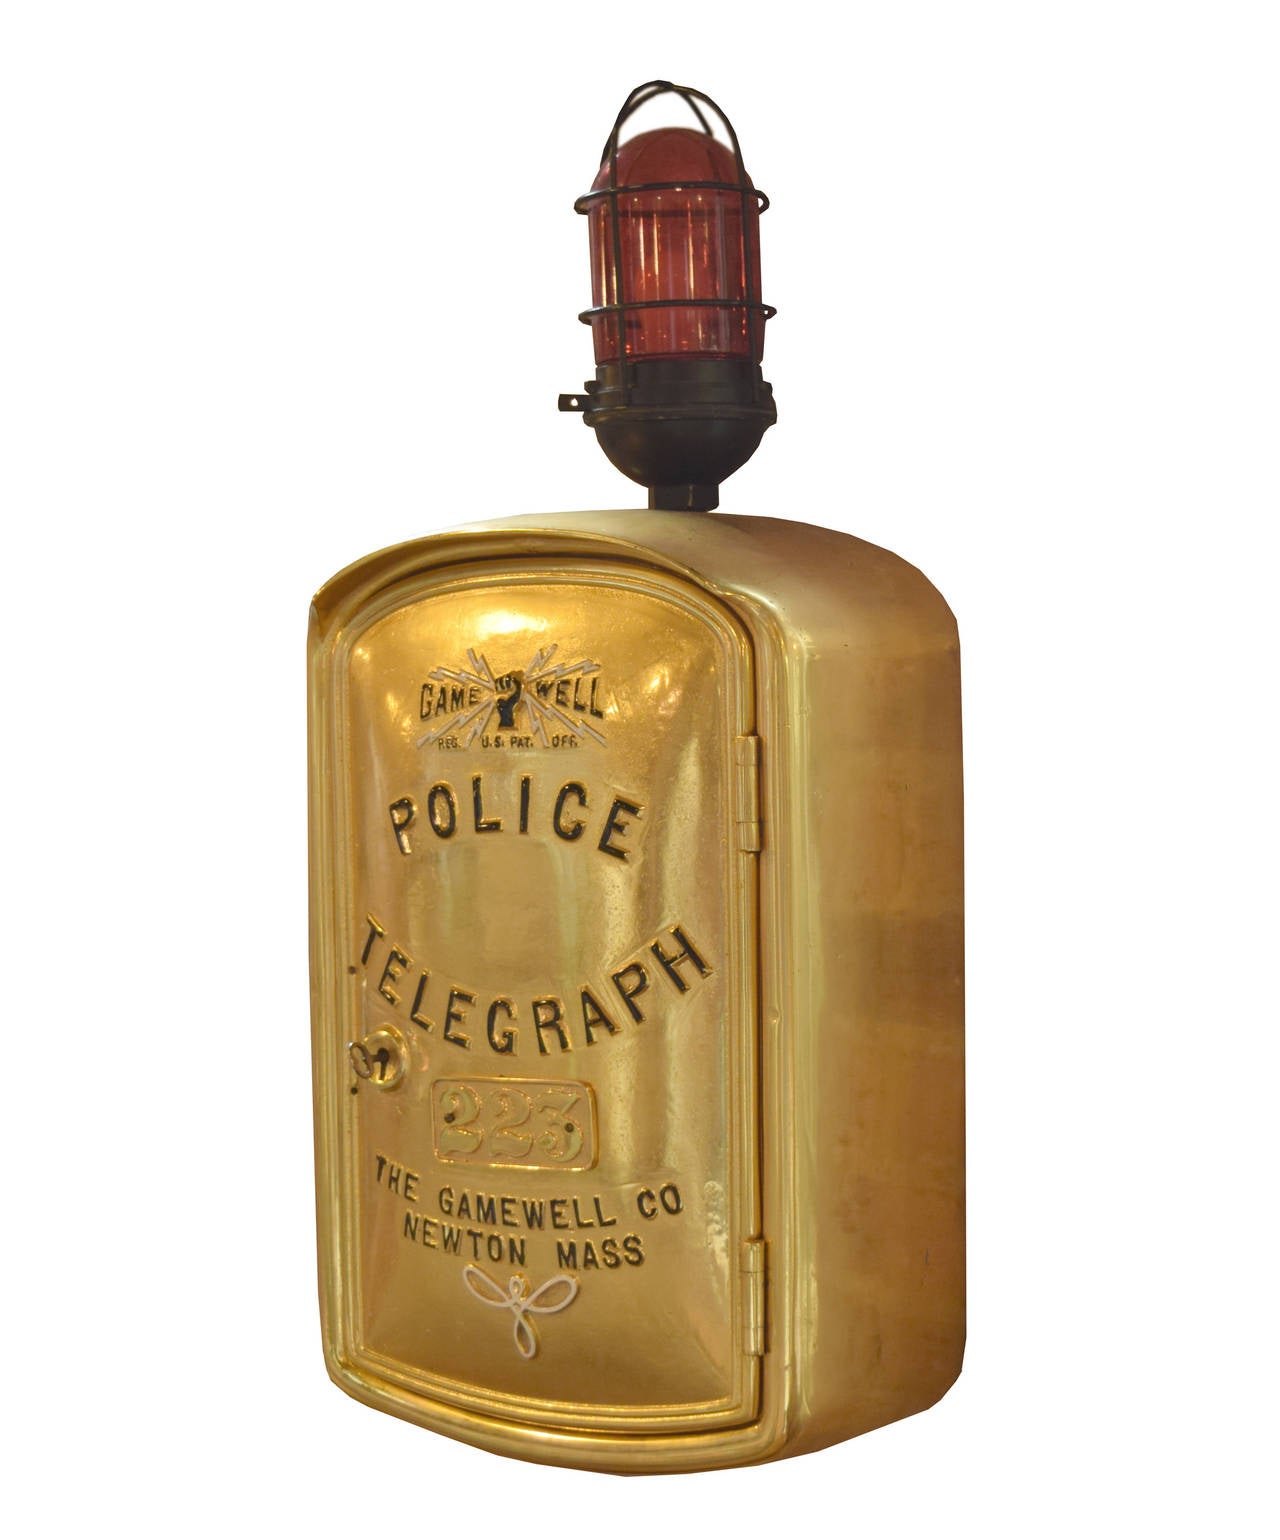 Gold plated police telegraph call box by Gamewell Co, Newton Mass in wonderful restored condition, with functioning lock and key. This police call box was gifted to a Chicago police officer upon his retirement.